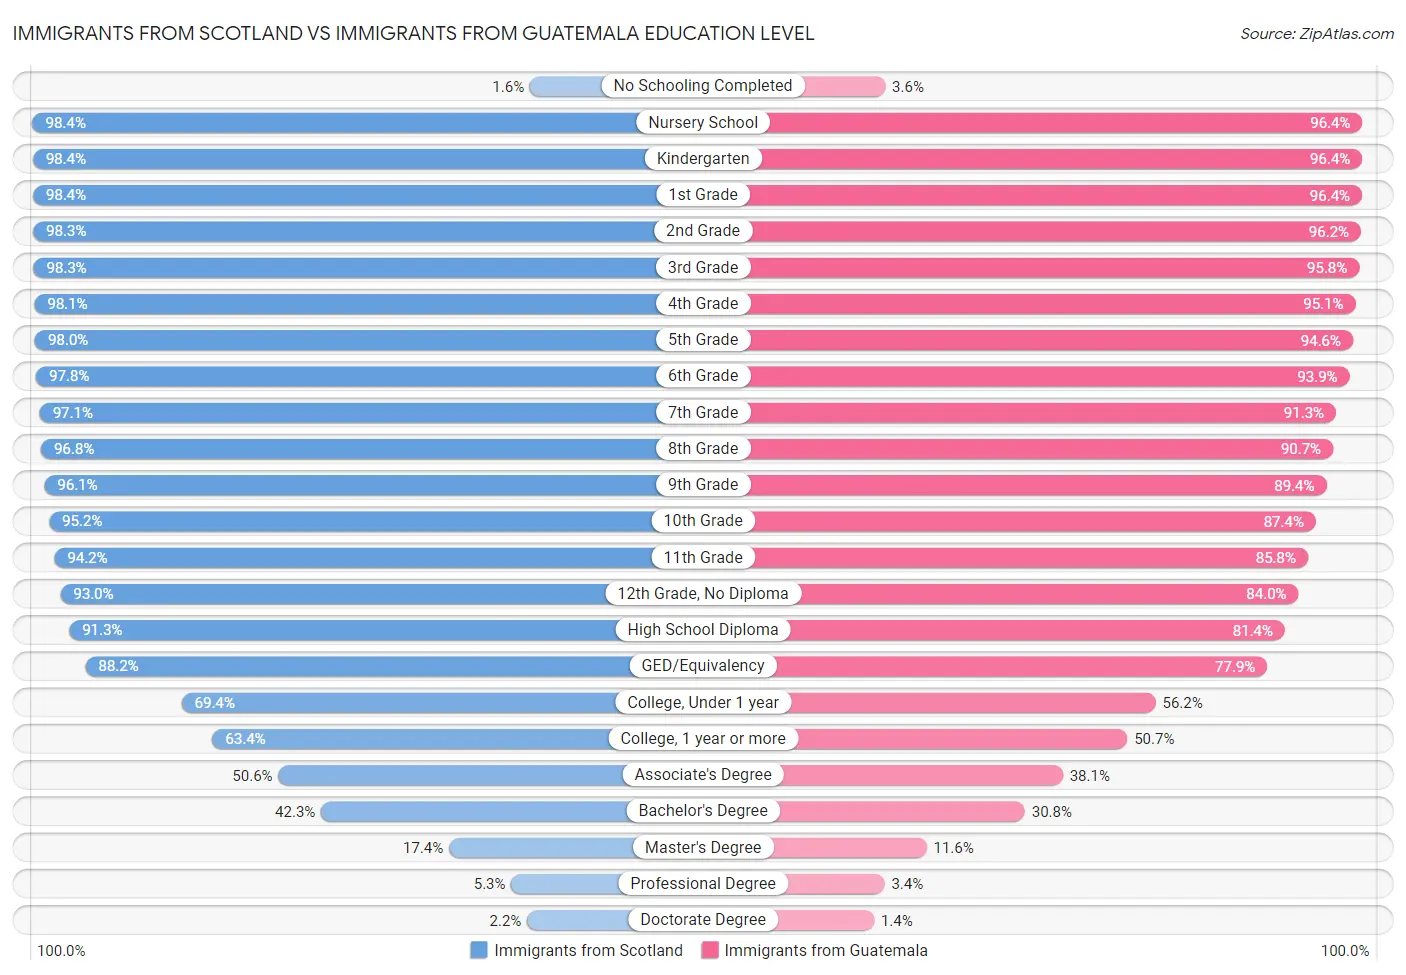 Immigrants from Scotland vs Immigrants from Guatemala Education Level